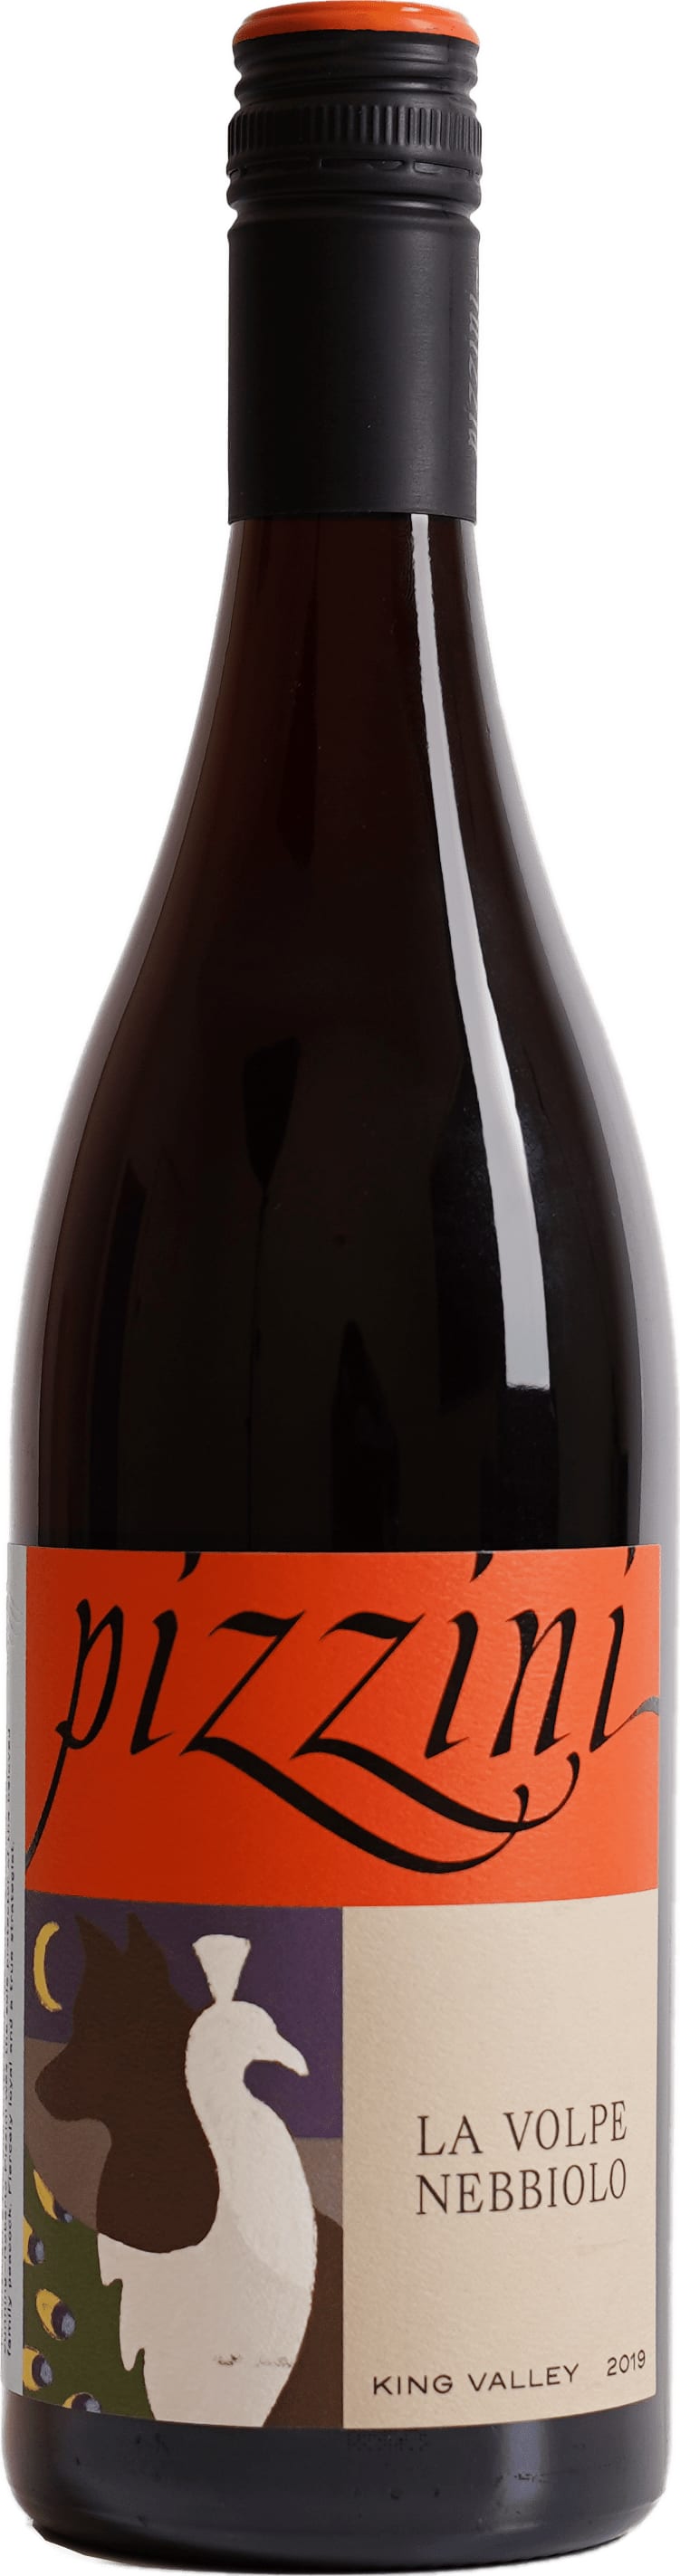 La Volpe Nebbiolo 22 Pizzini 75cl - Buy Pizzini Wines Wines from GREAT WINES DIRECT wine shop